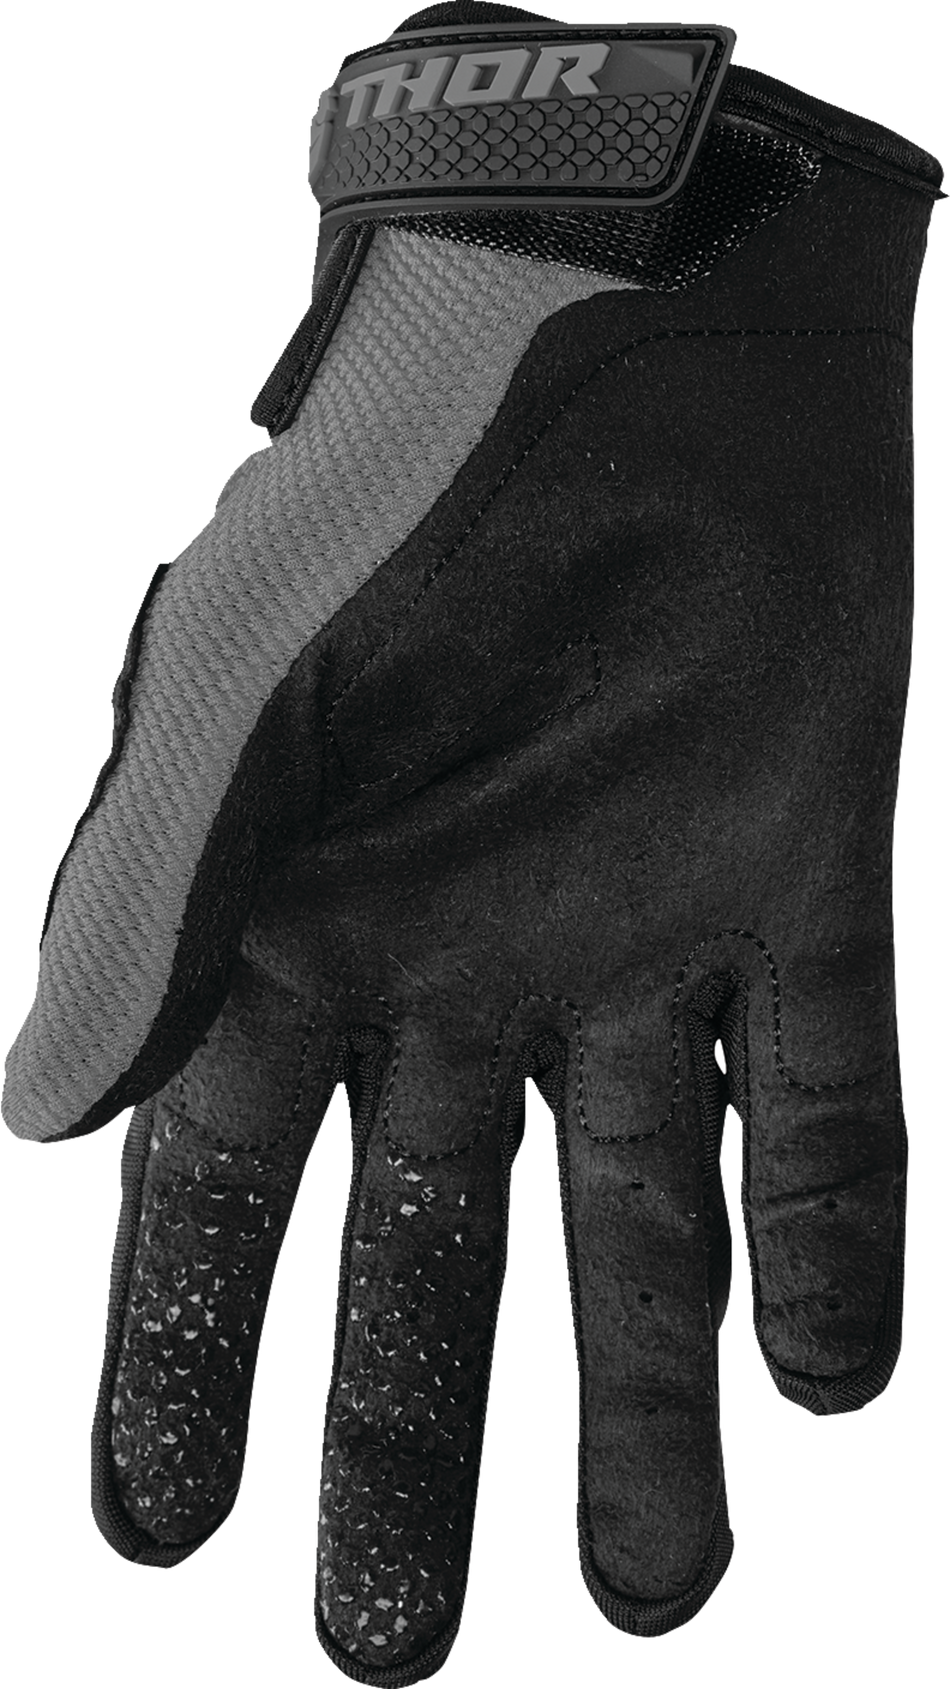 THOR Sector Gloves - Gray/White - 2XL 3330-7278